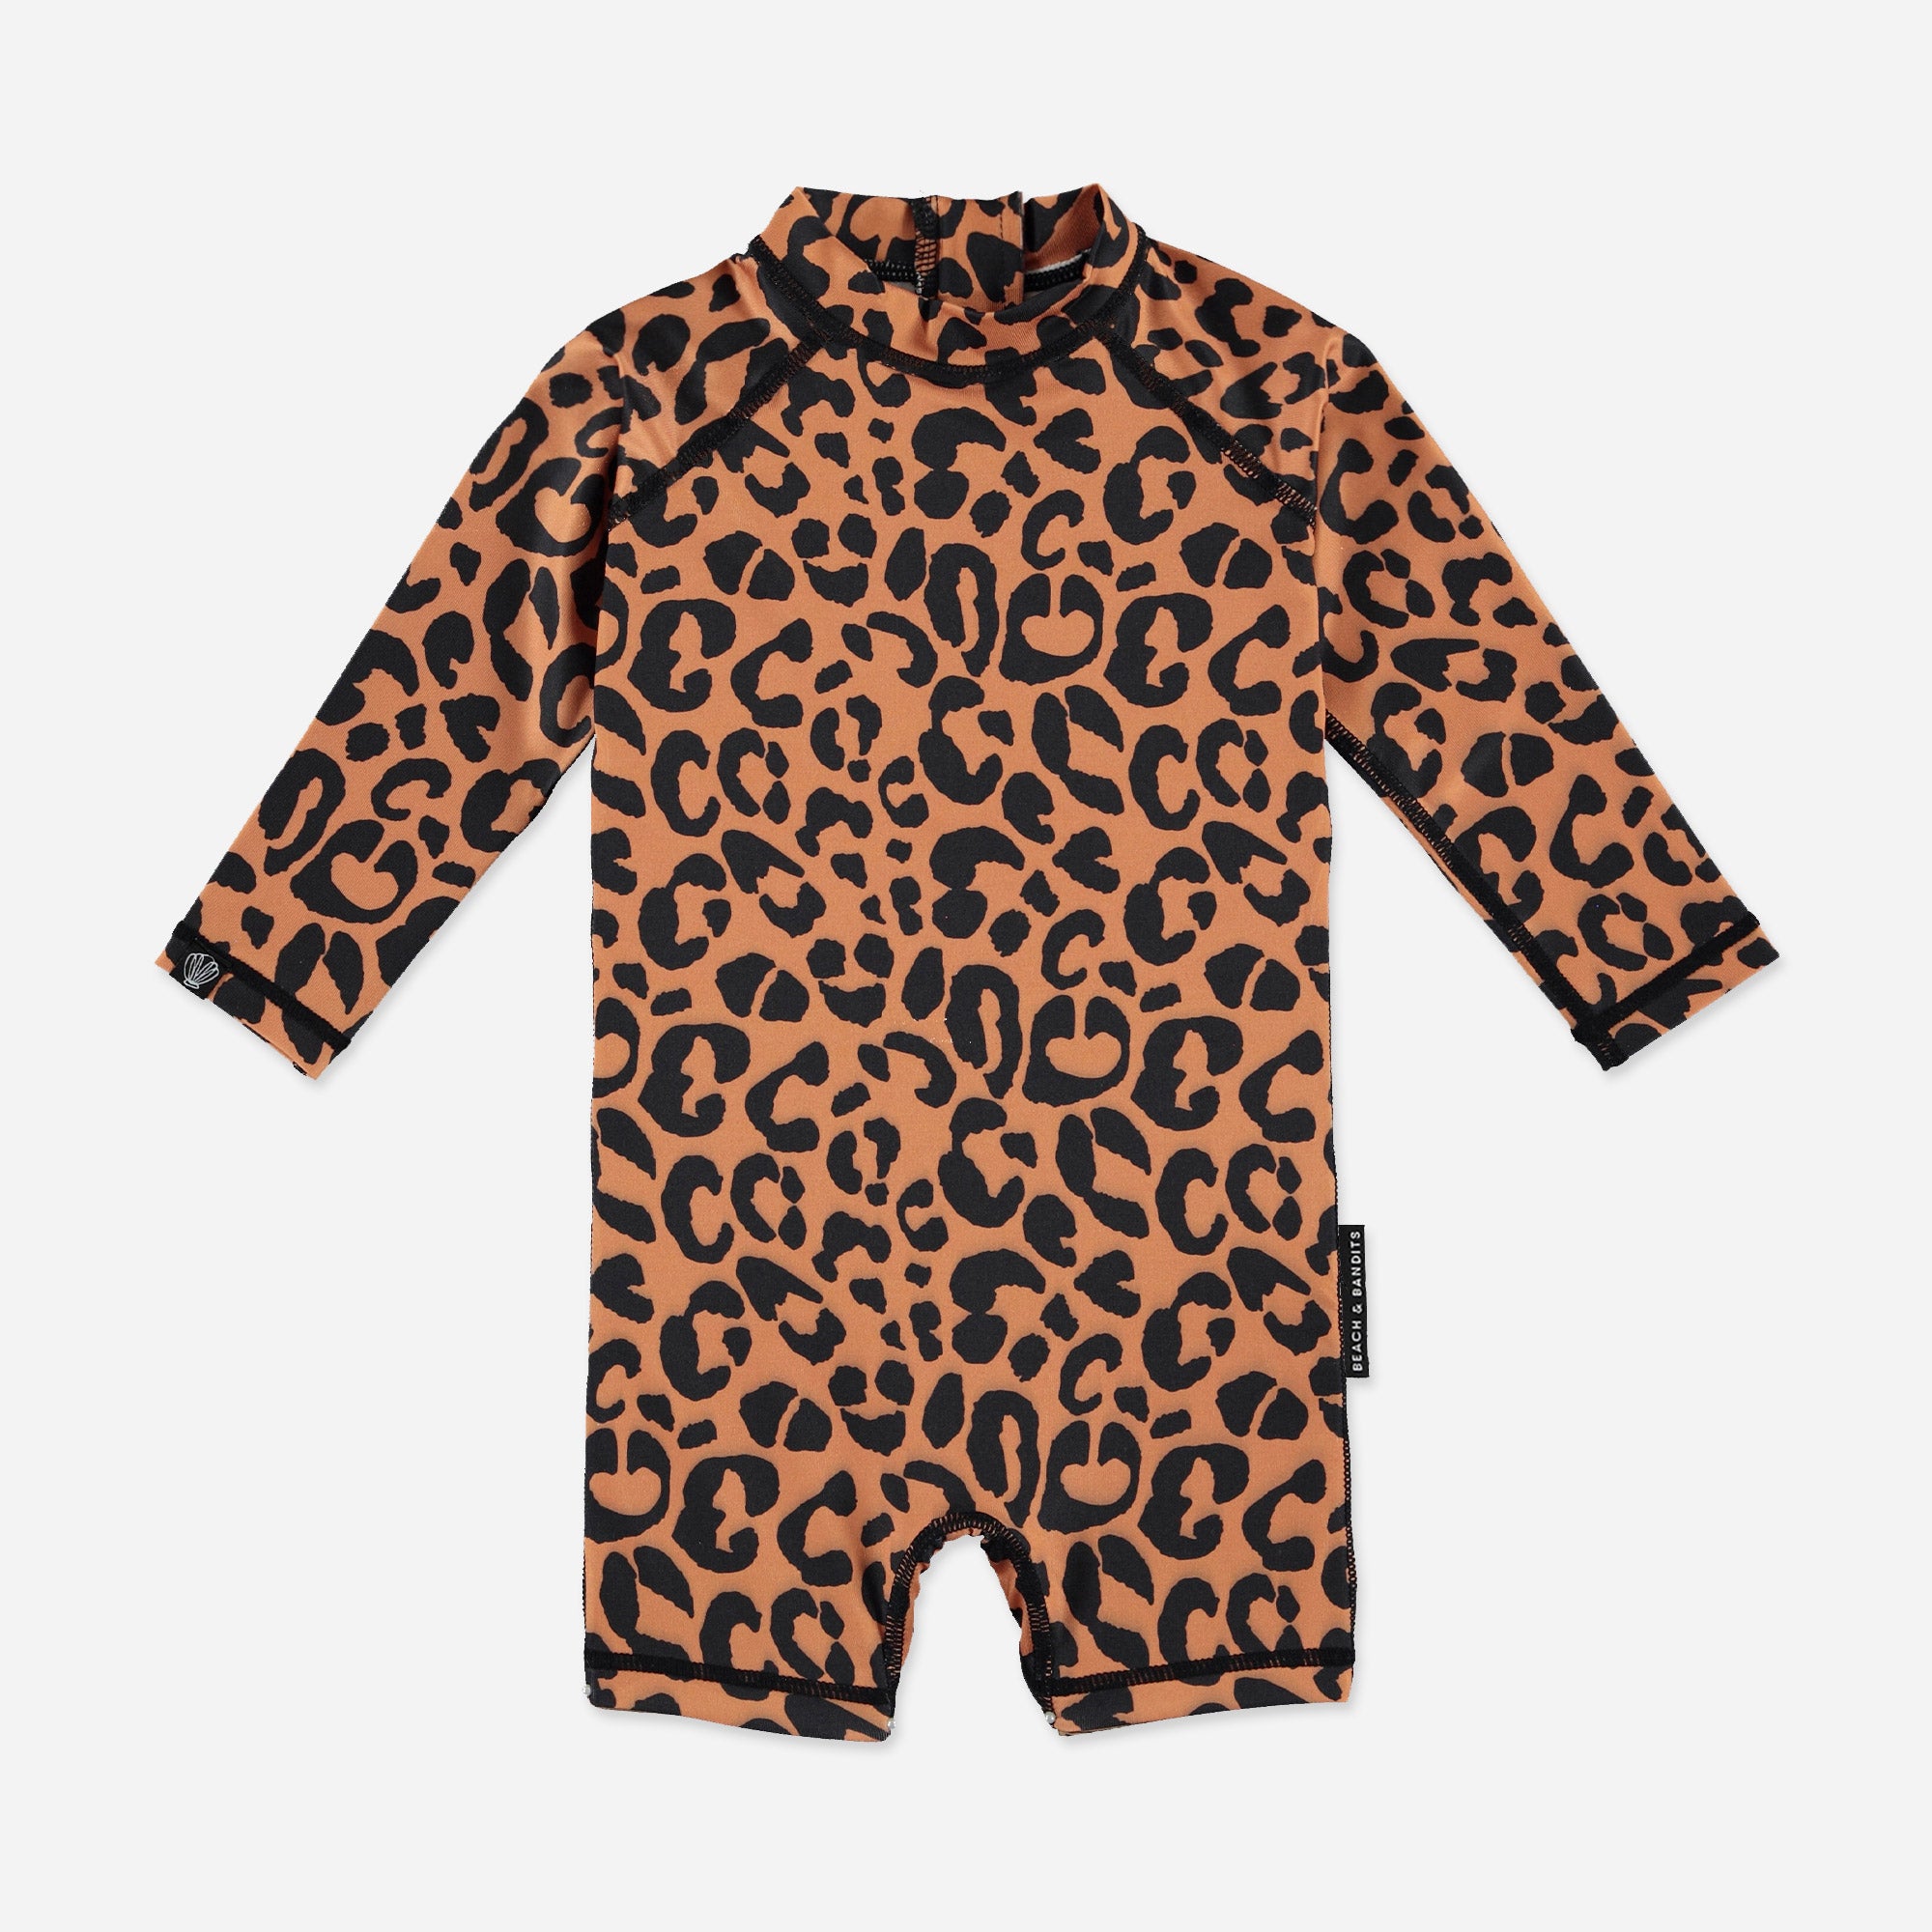 COCO LEOPARD BABY